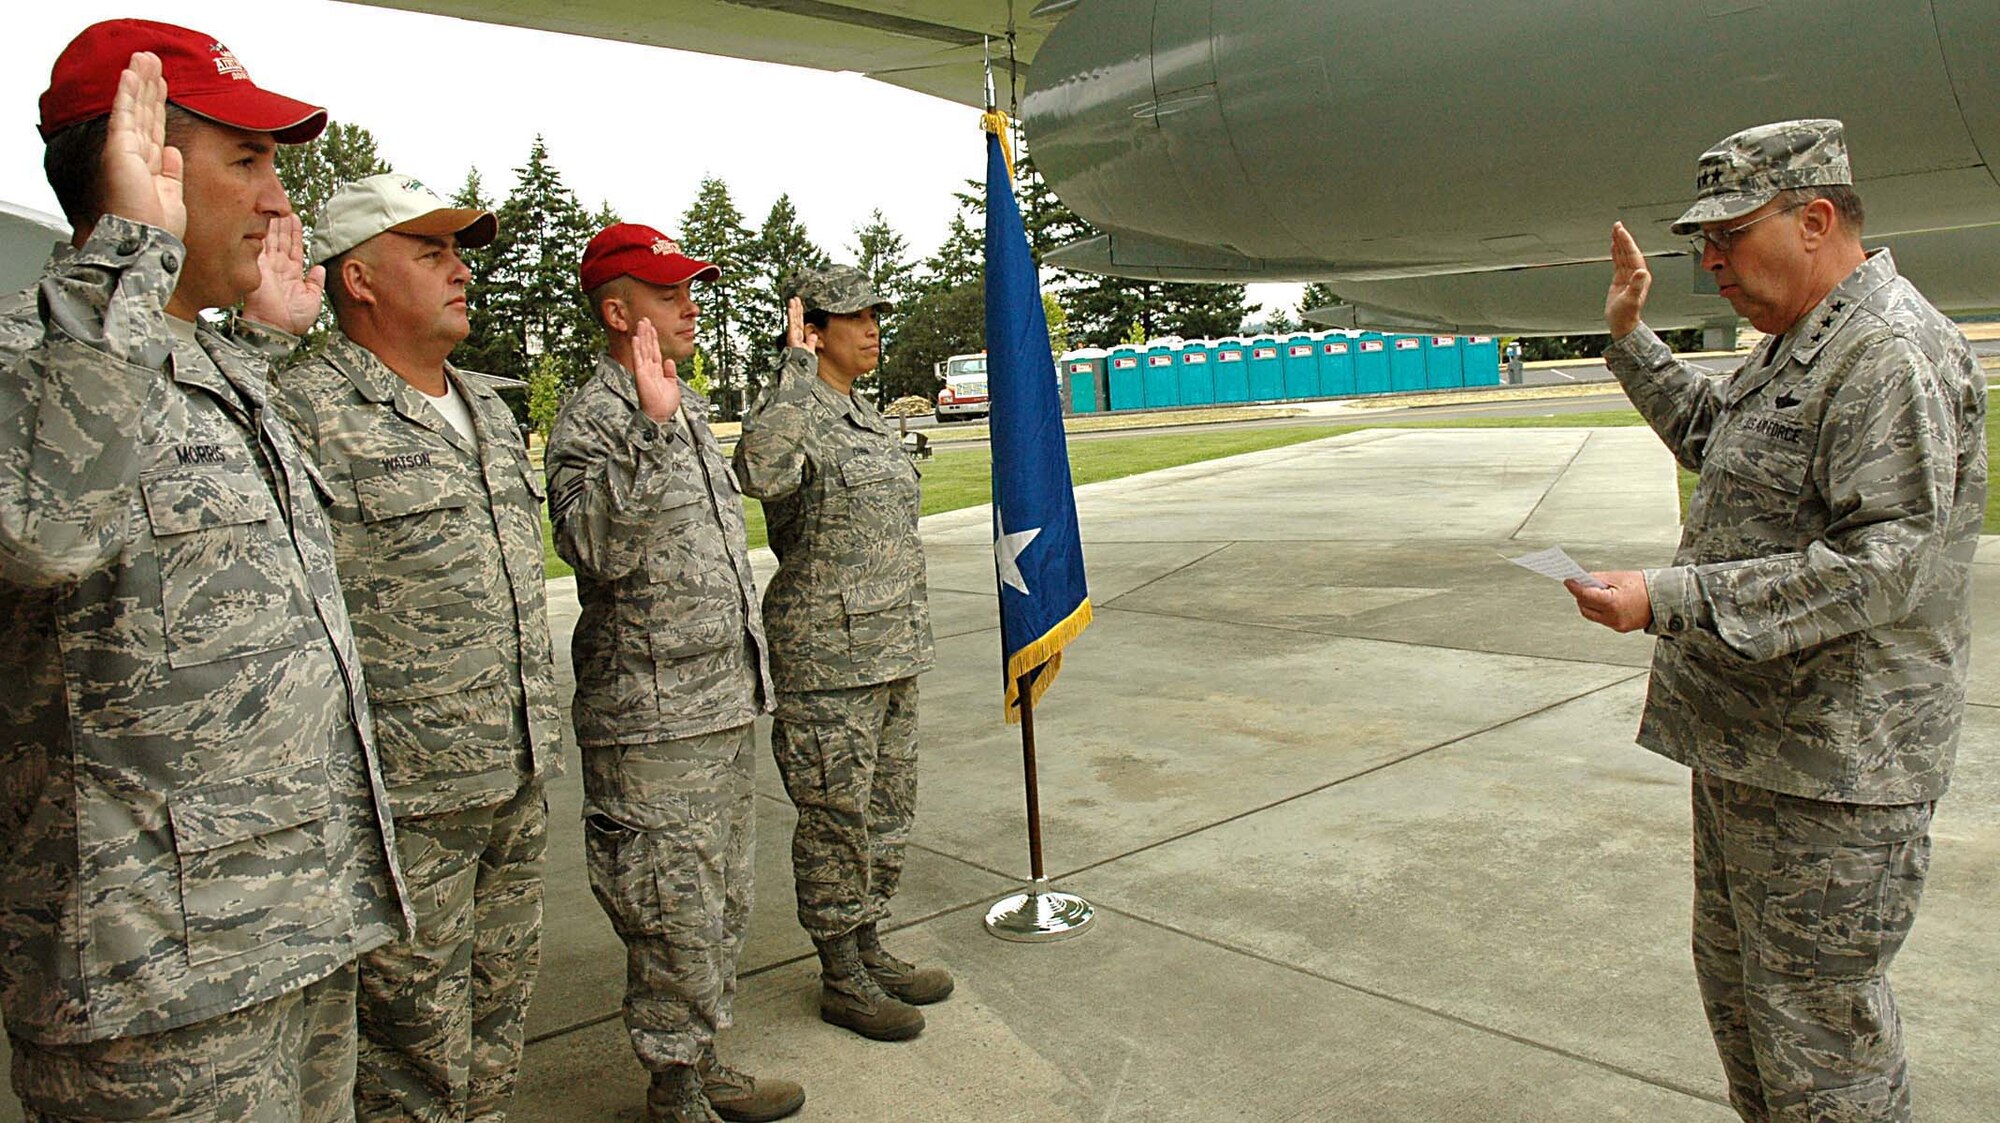 Lt. Gen. Charles Stenner Jr., Air Force Reserve Command commander, reenlists (from left to right) Chief Master Sgt. Daniel Morris and Master Sgt. Adam Harrison both from the 446th Maintenance Operations Flight, Master Sgt. Daniel Watson, 446th Maintenance Squadron, and Staff Sgt. Anayansi Chinn, 446th Mission Support Squadron, during the 2009 Rodeo competition at McChord Air Force Base, Wash., July 24.  The 446th Airlift Wing is the Reserve associate unit at McChord. (U.S. Air Force photo/Airman 1st Class Patrick Cabellon)